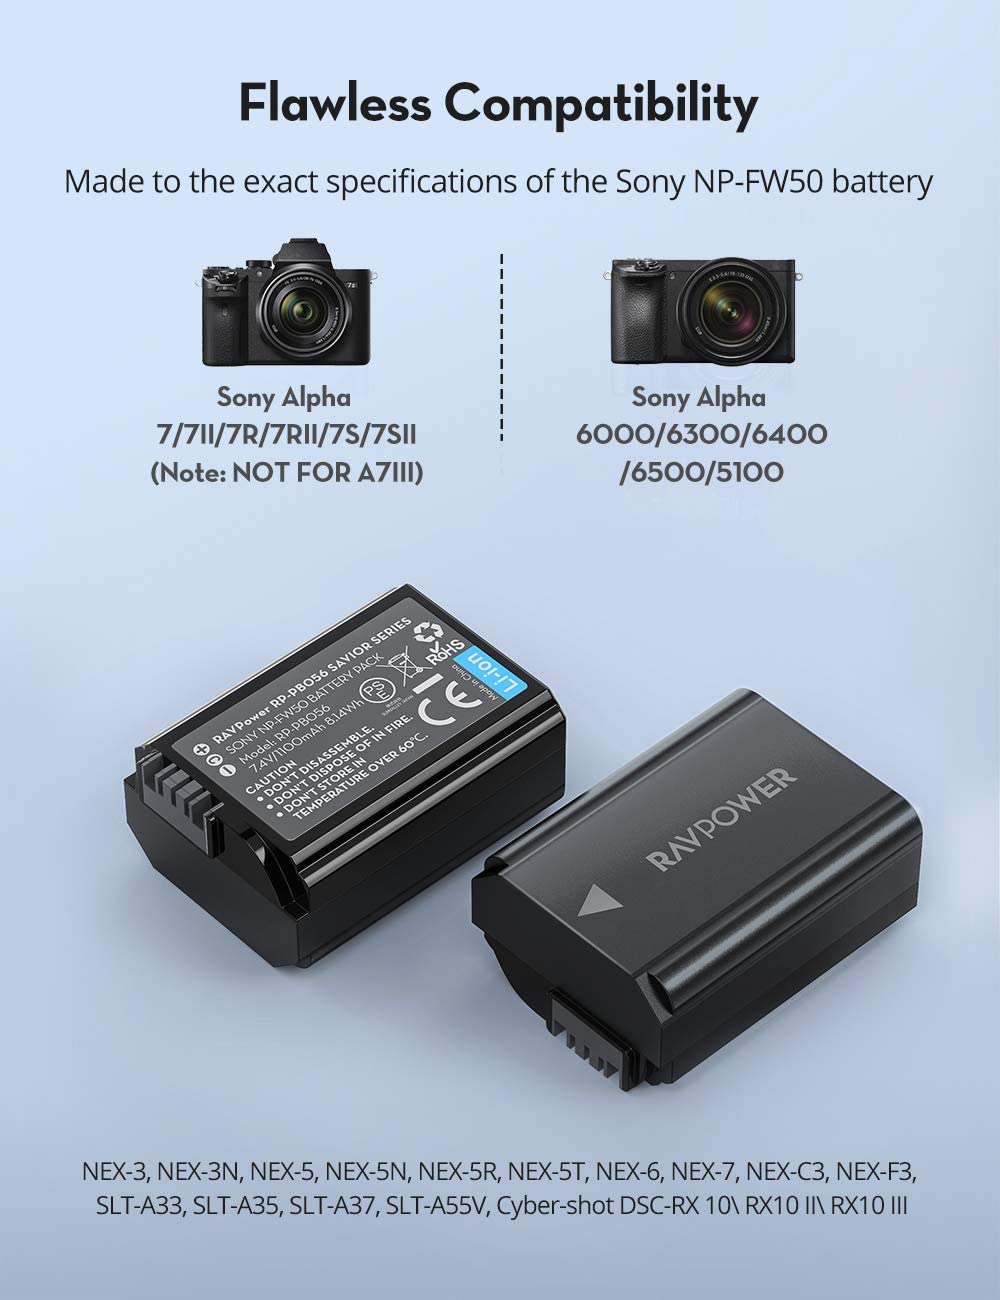 RAVPower NP-FW50 1100mAh Camera Battery Charger Set for Sony